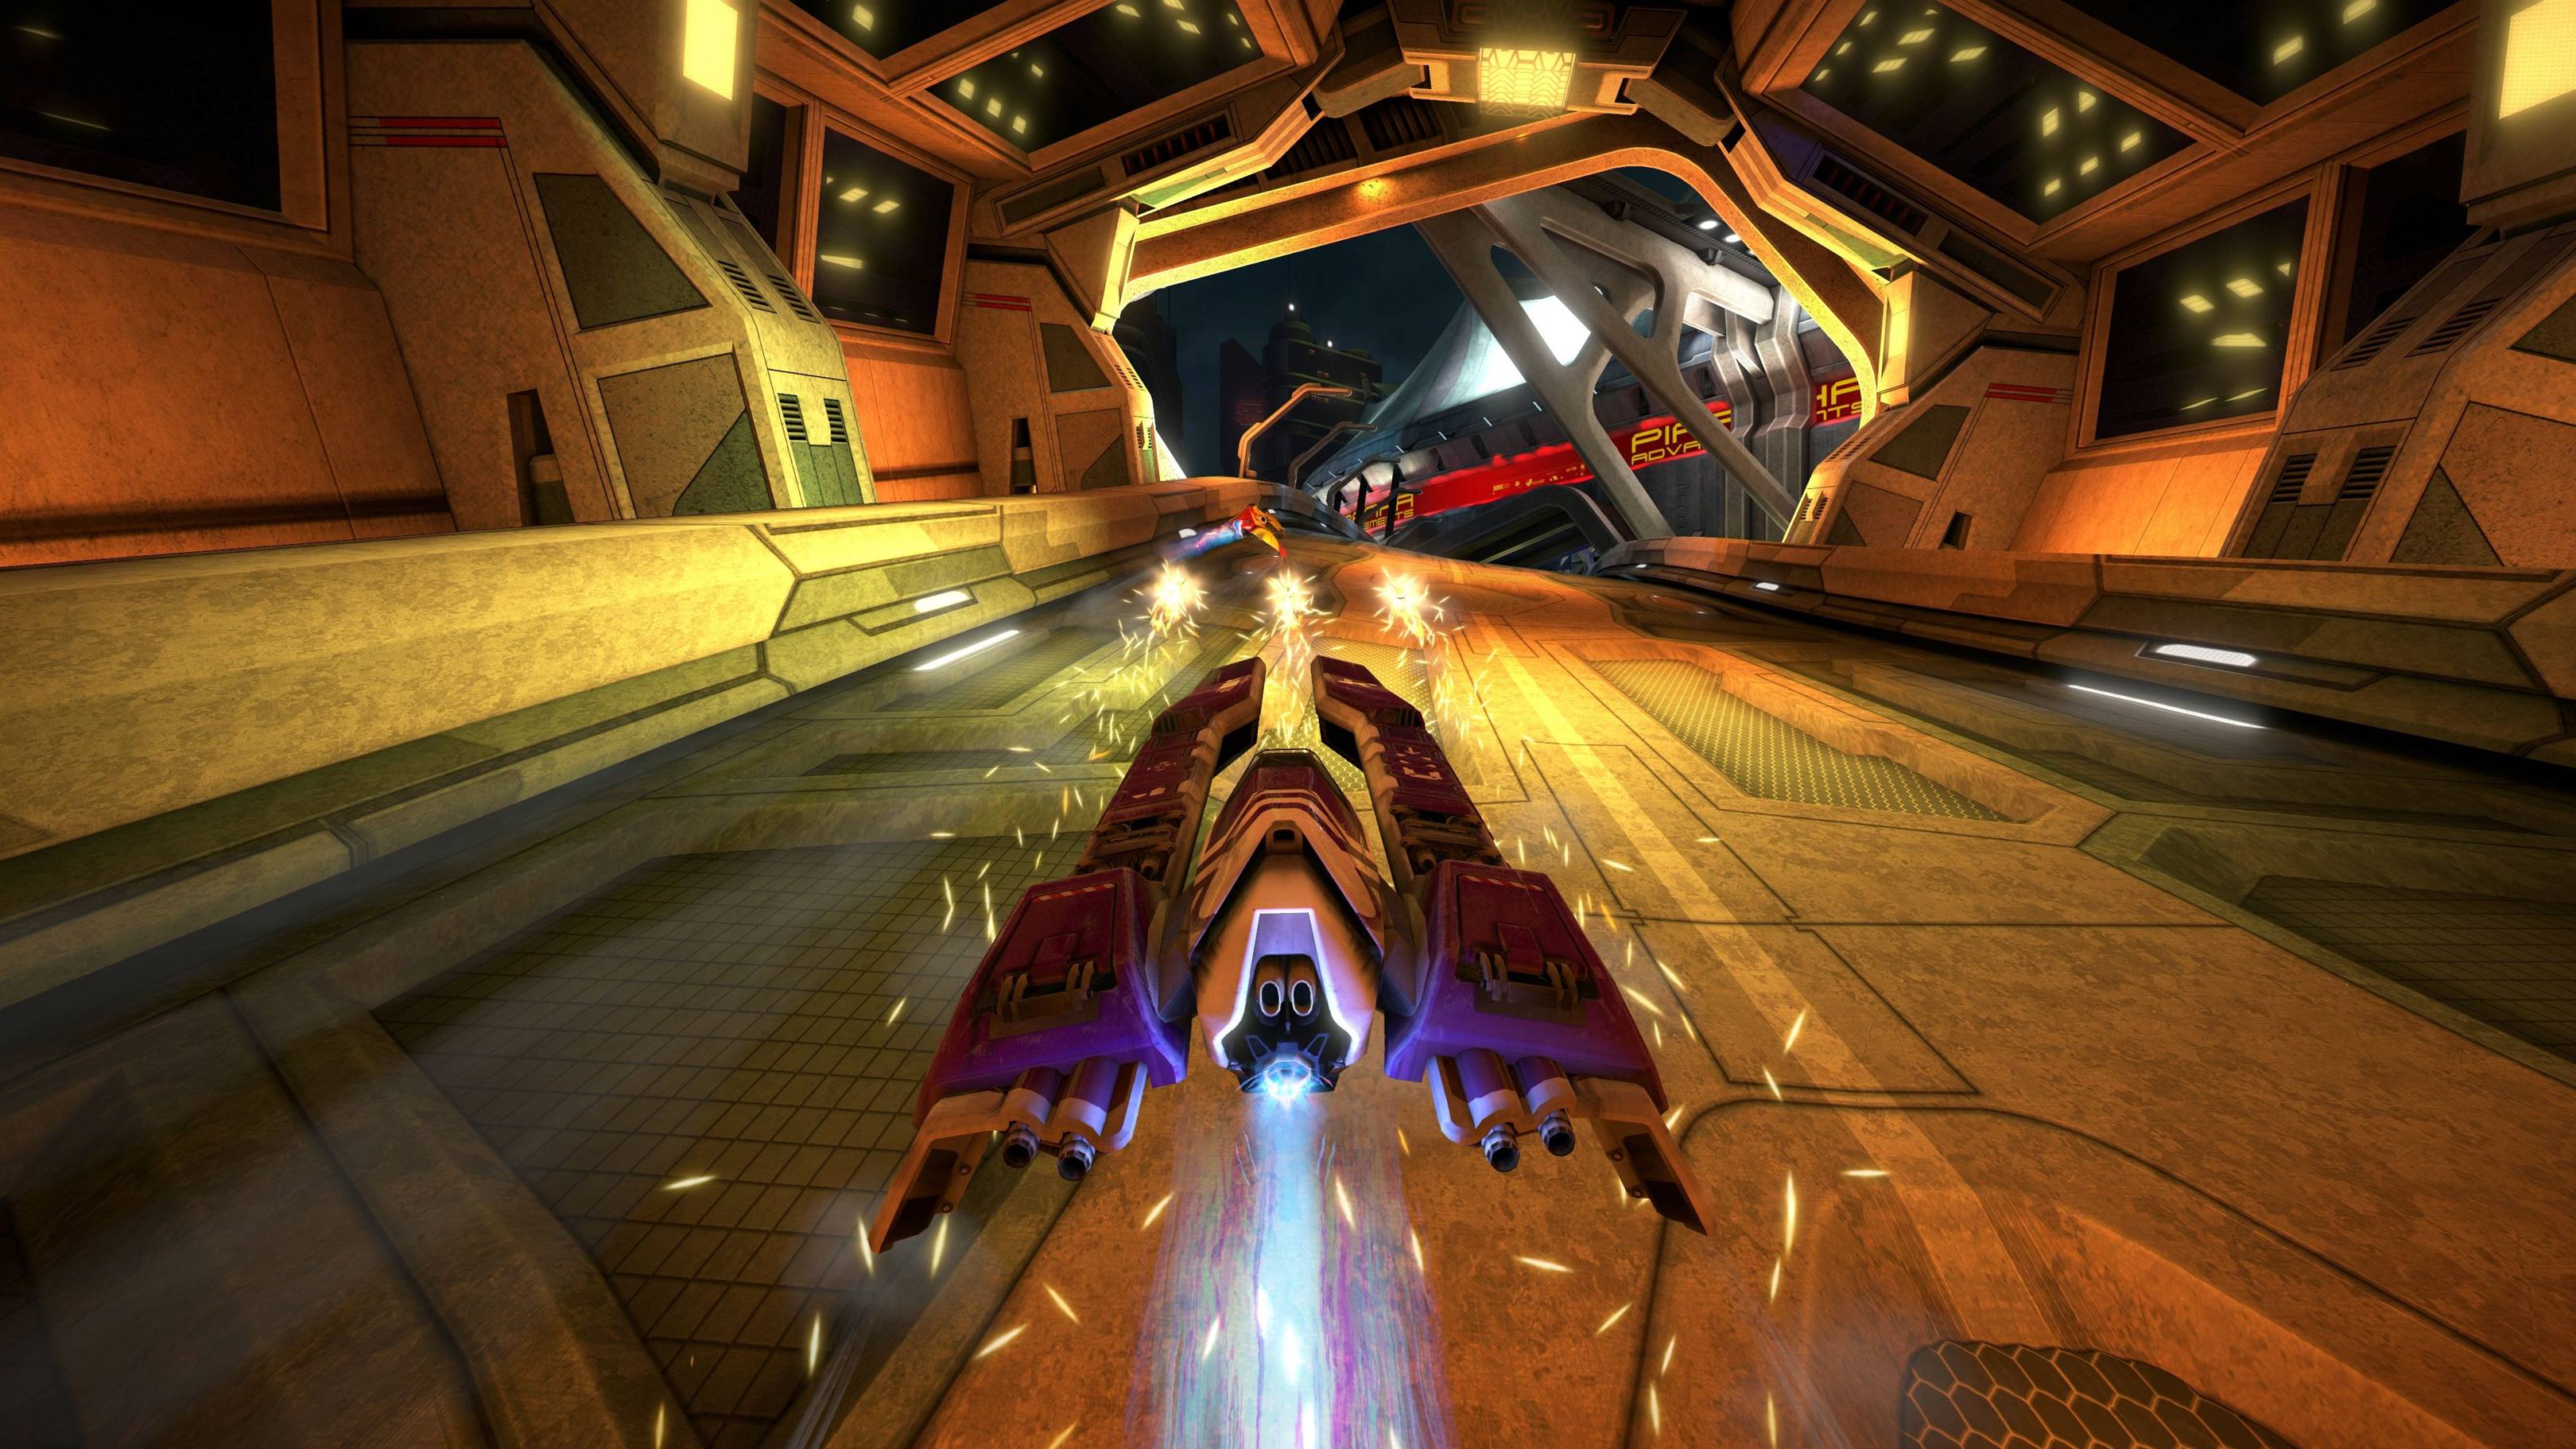 wipeout 2048 ps4